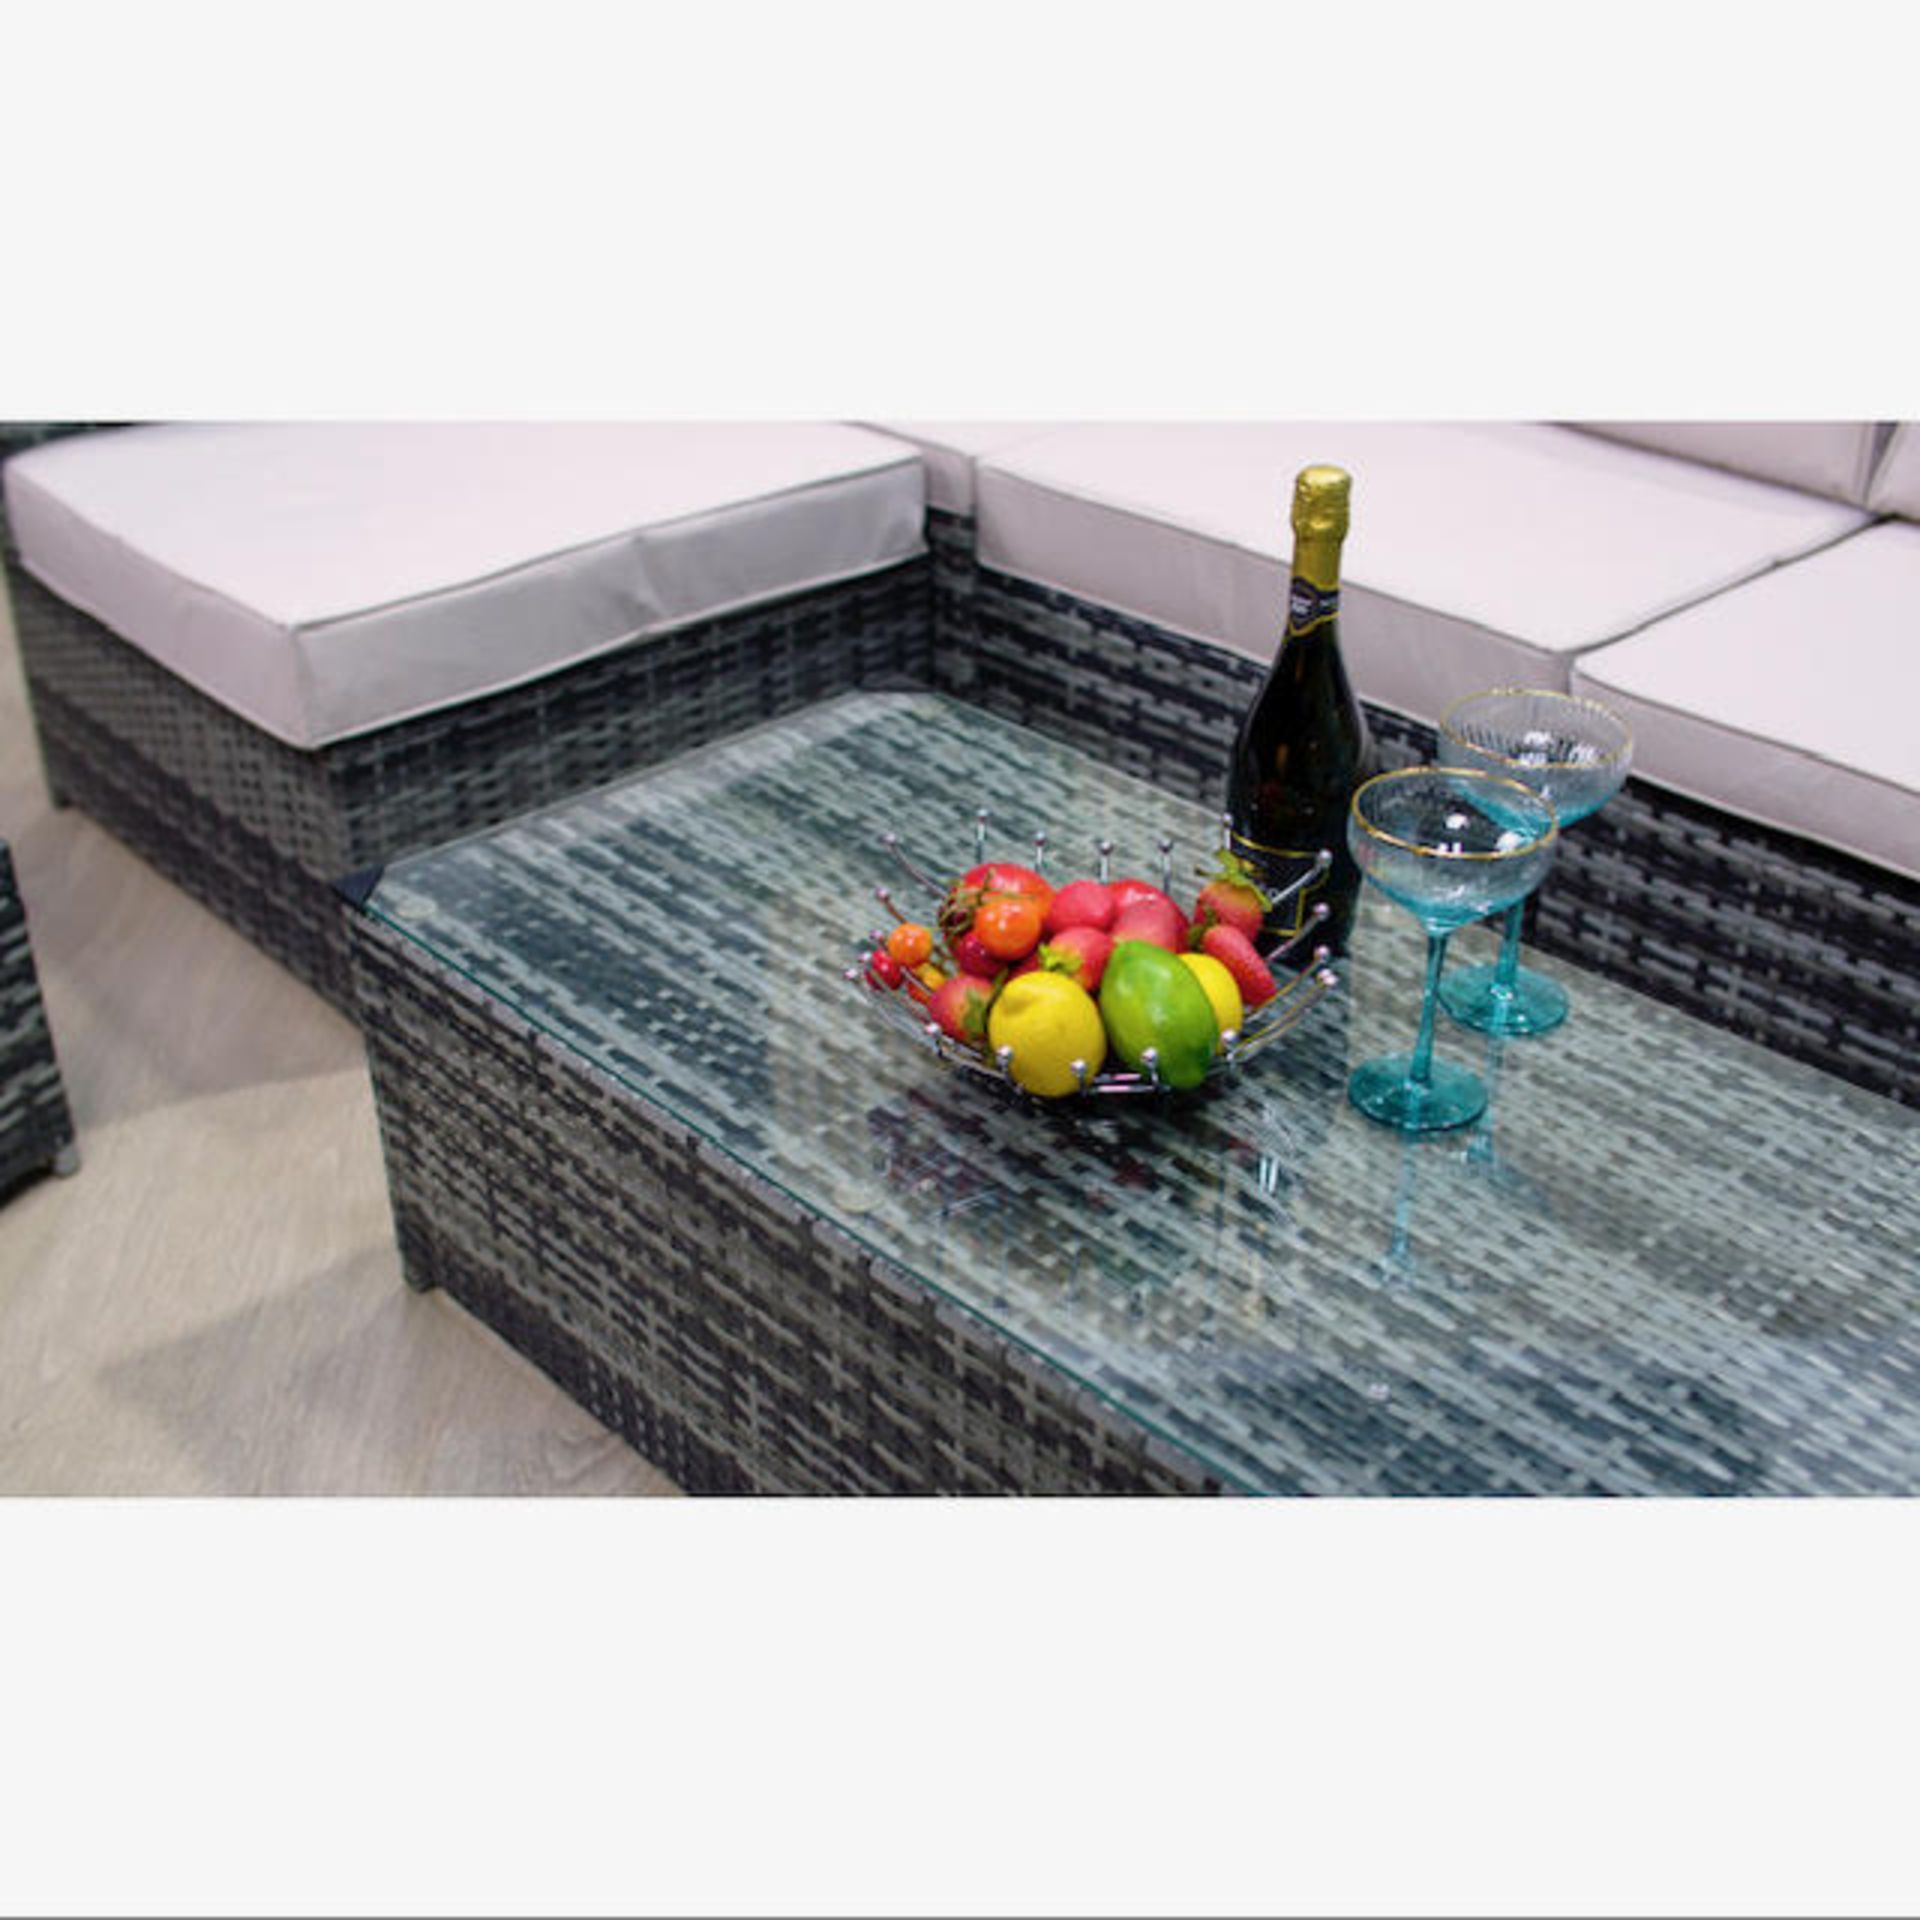 BRAND NEW LINEA 7 PIECE LUXURY RATTAN SETS RRP £1499 EACH. PERFECT FOR THOSE SUMMER NIGHTS FOR - Image 2 of 6